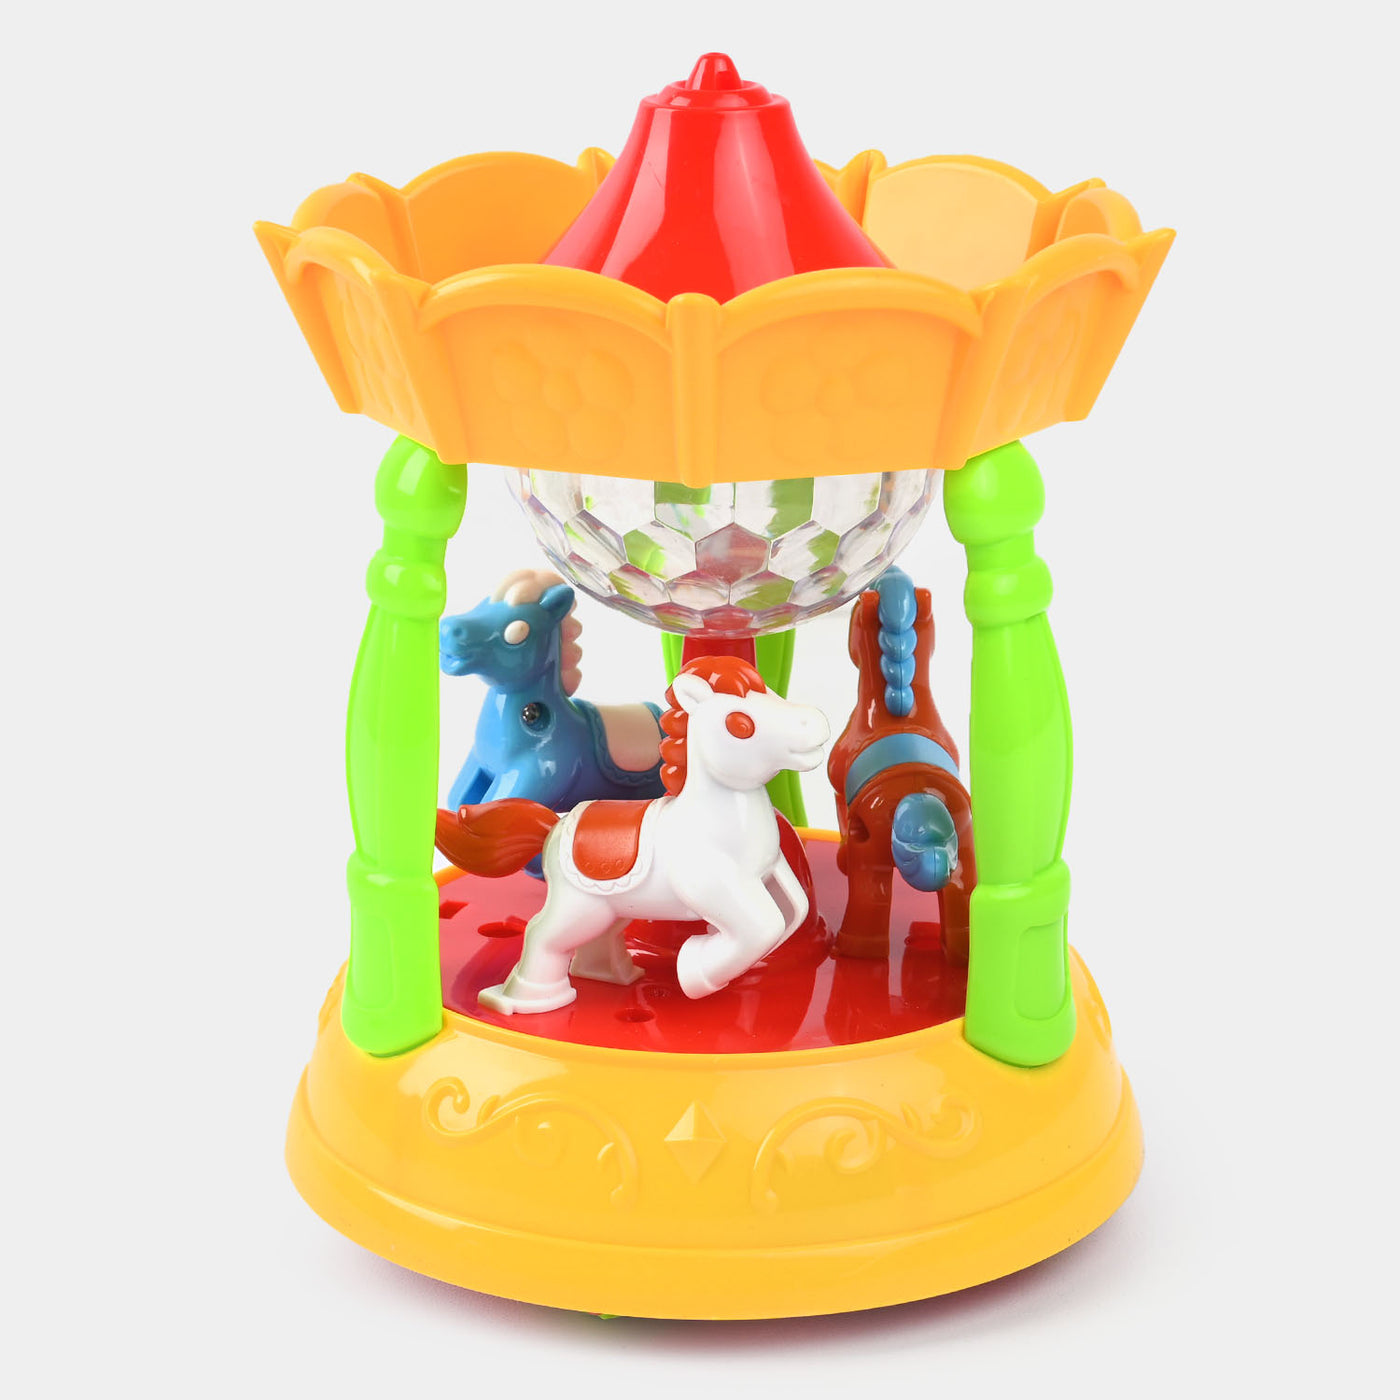 Carousel With Light & music For Kids